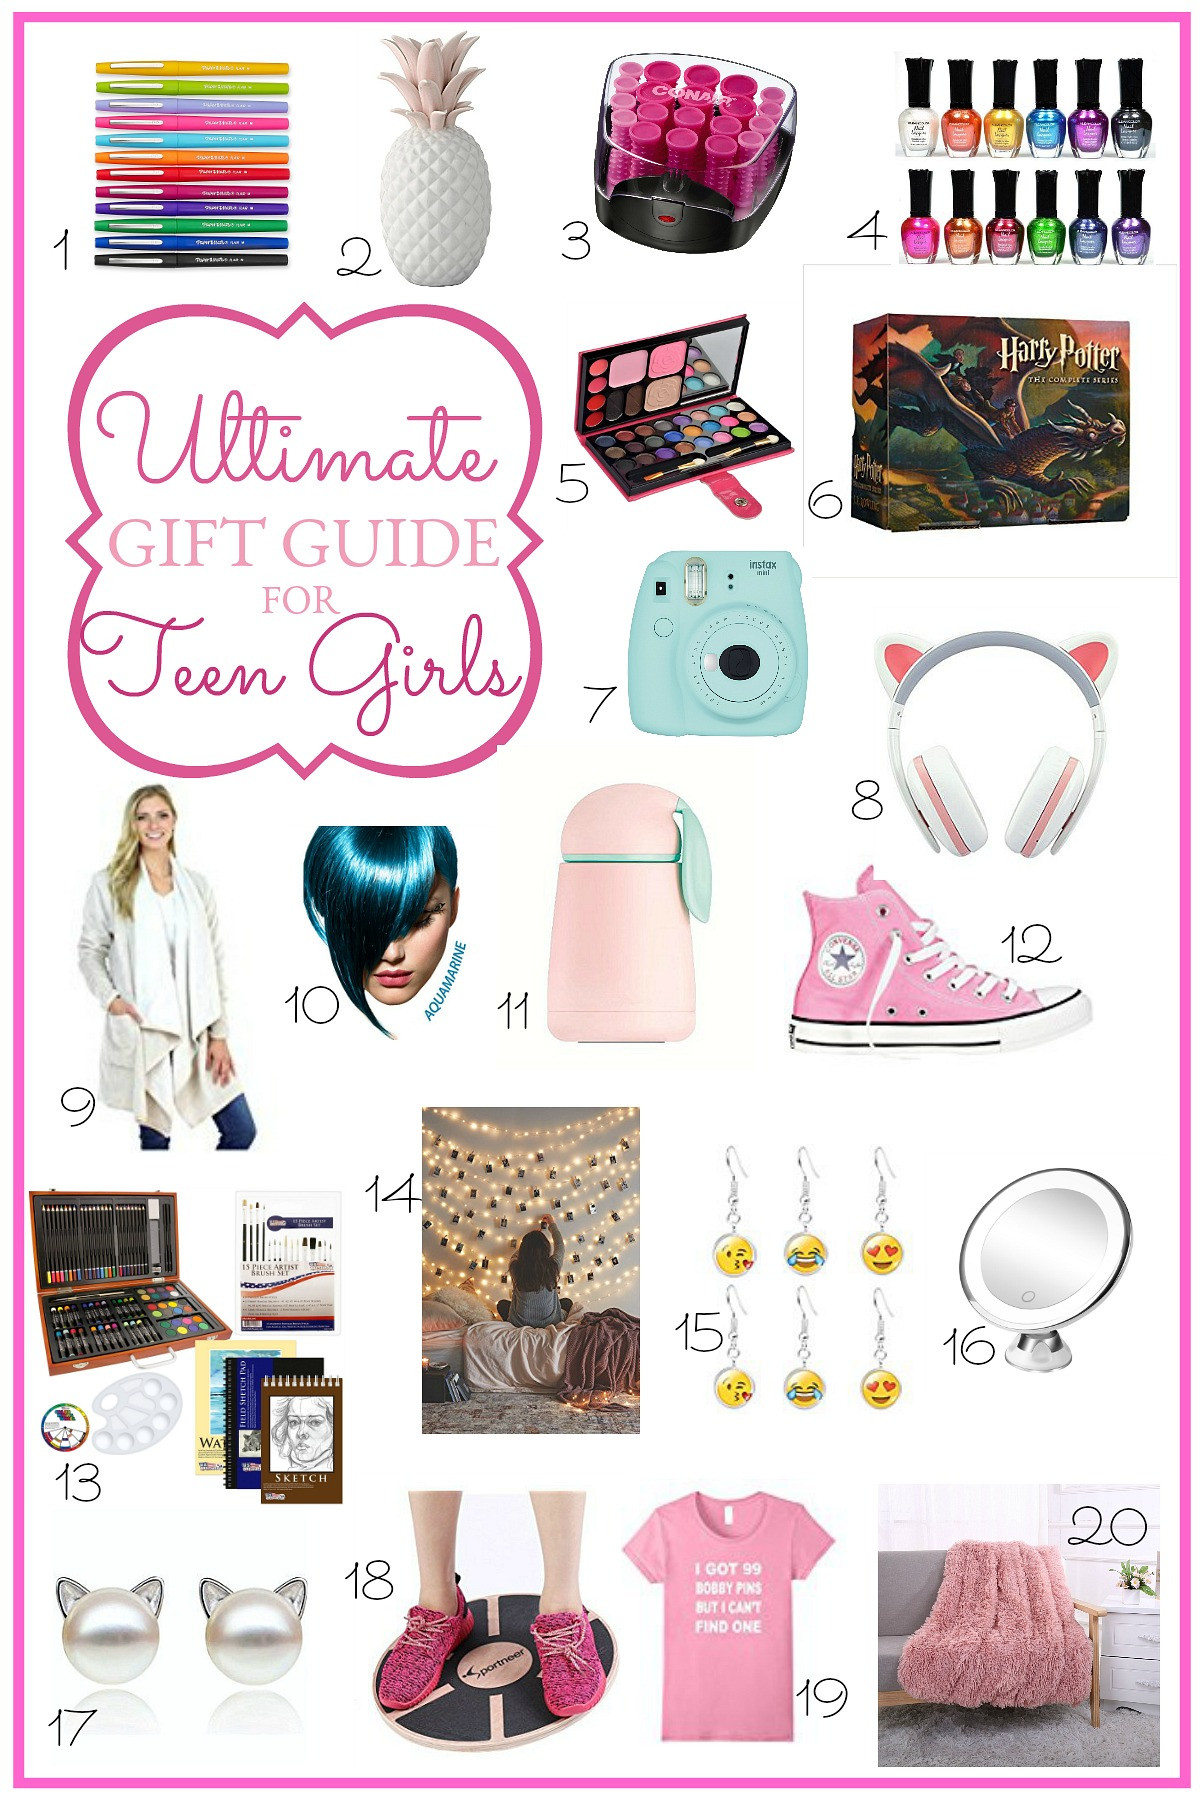 Good Girlfriend Gift Ideas
 Ultimate Holiday Gift Guide for Teen Girls